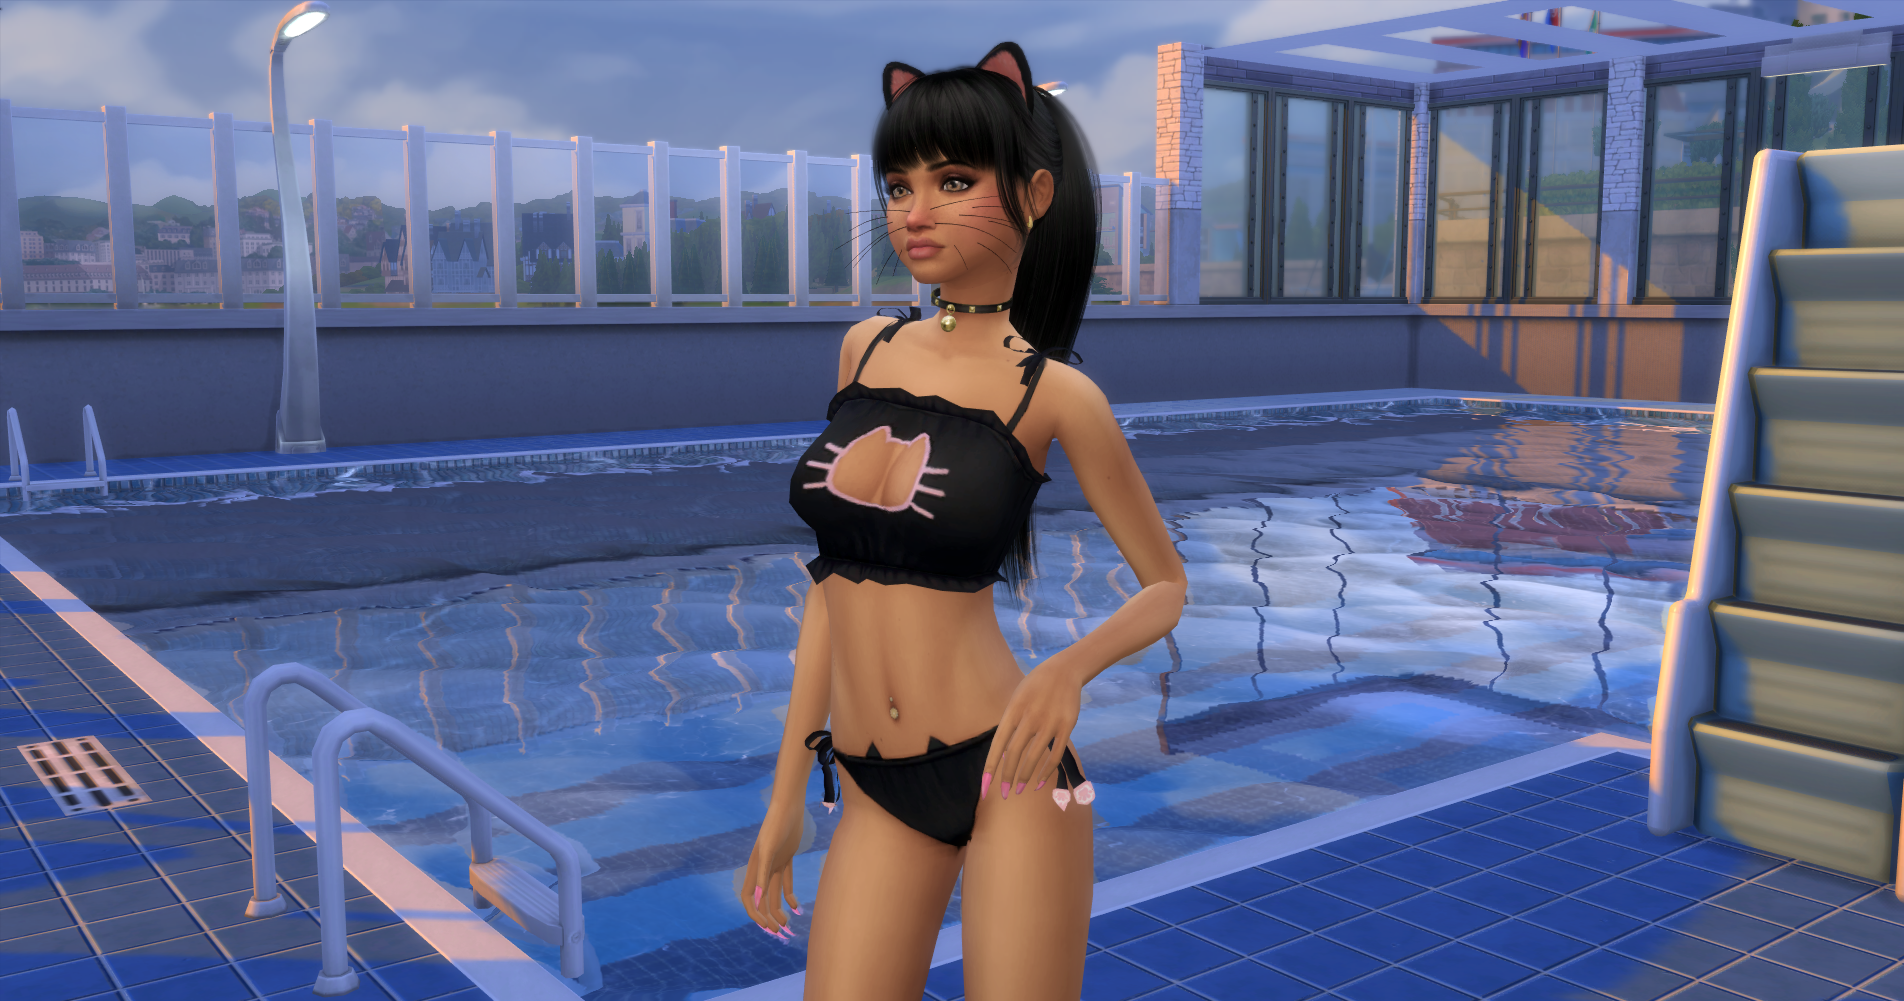 [Sims 4] erplederp's Hot Sets - Sexy costumes for your sims! (30/09/18 - added catgirl bikini outfit!)